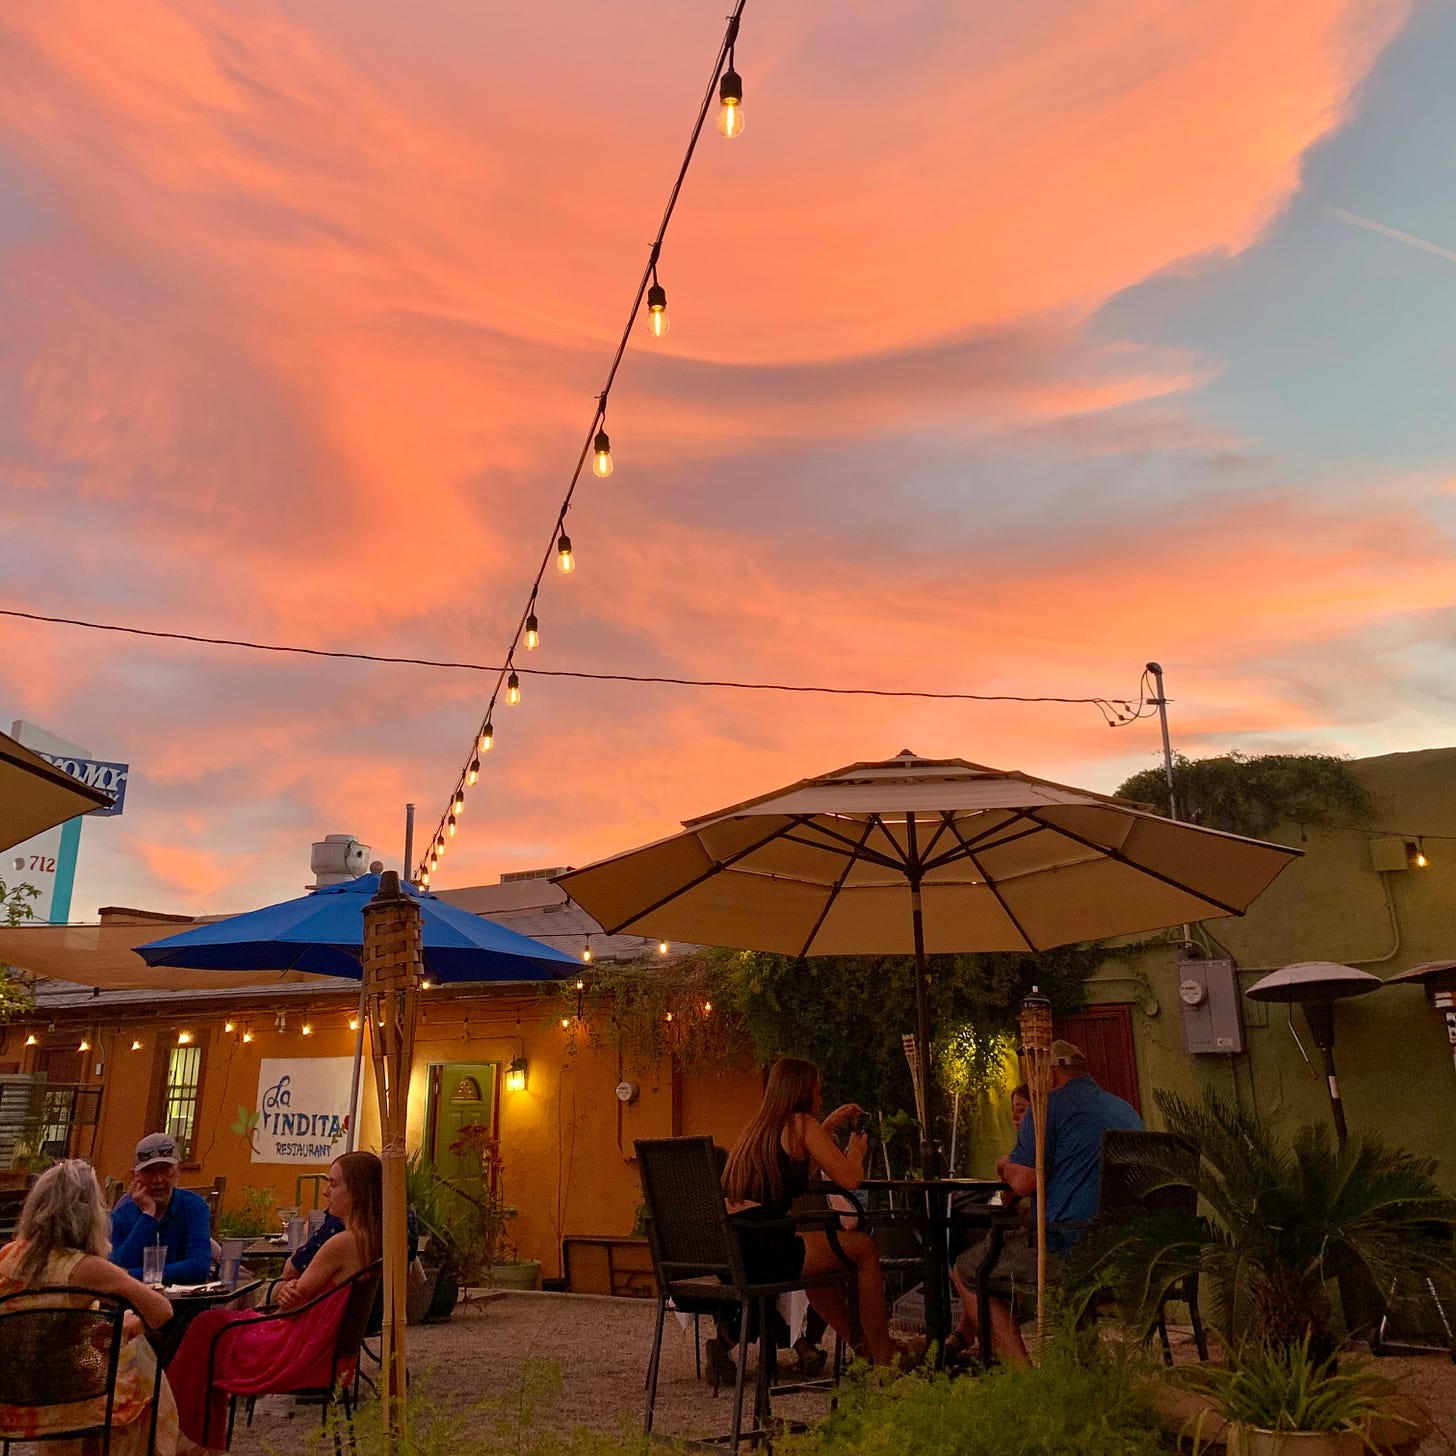 The red-orange sunset over the outdoor seating area of a Tucson restaurant illuminated with string lights.